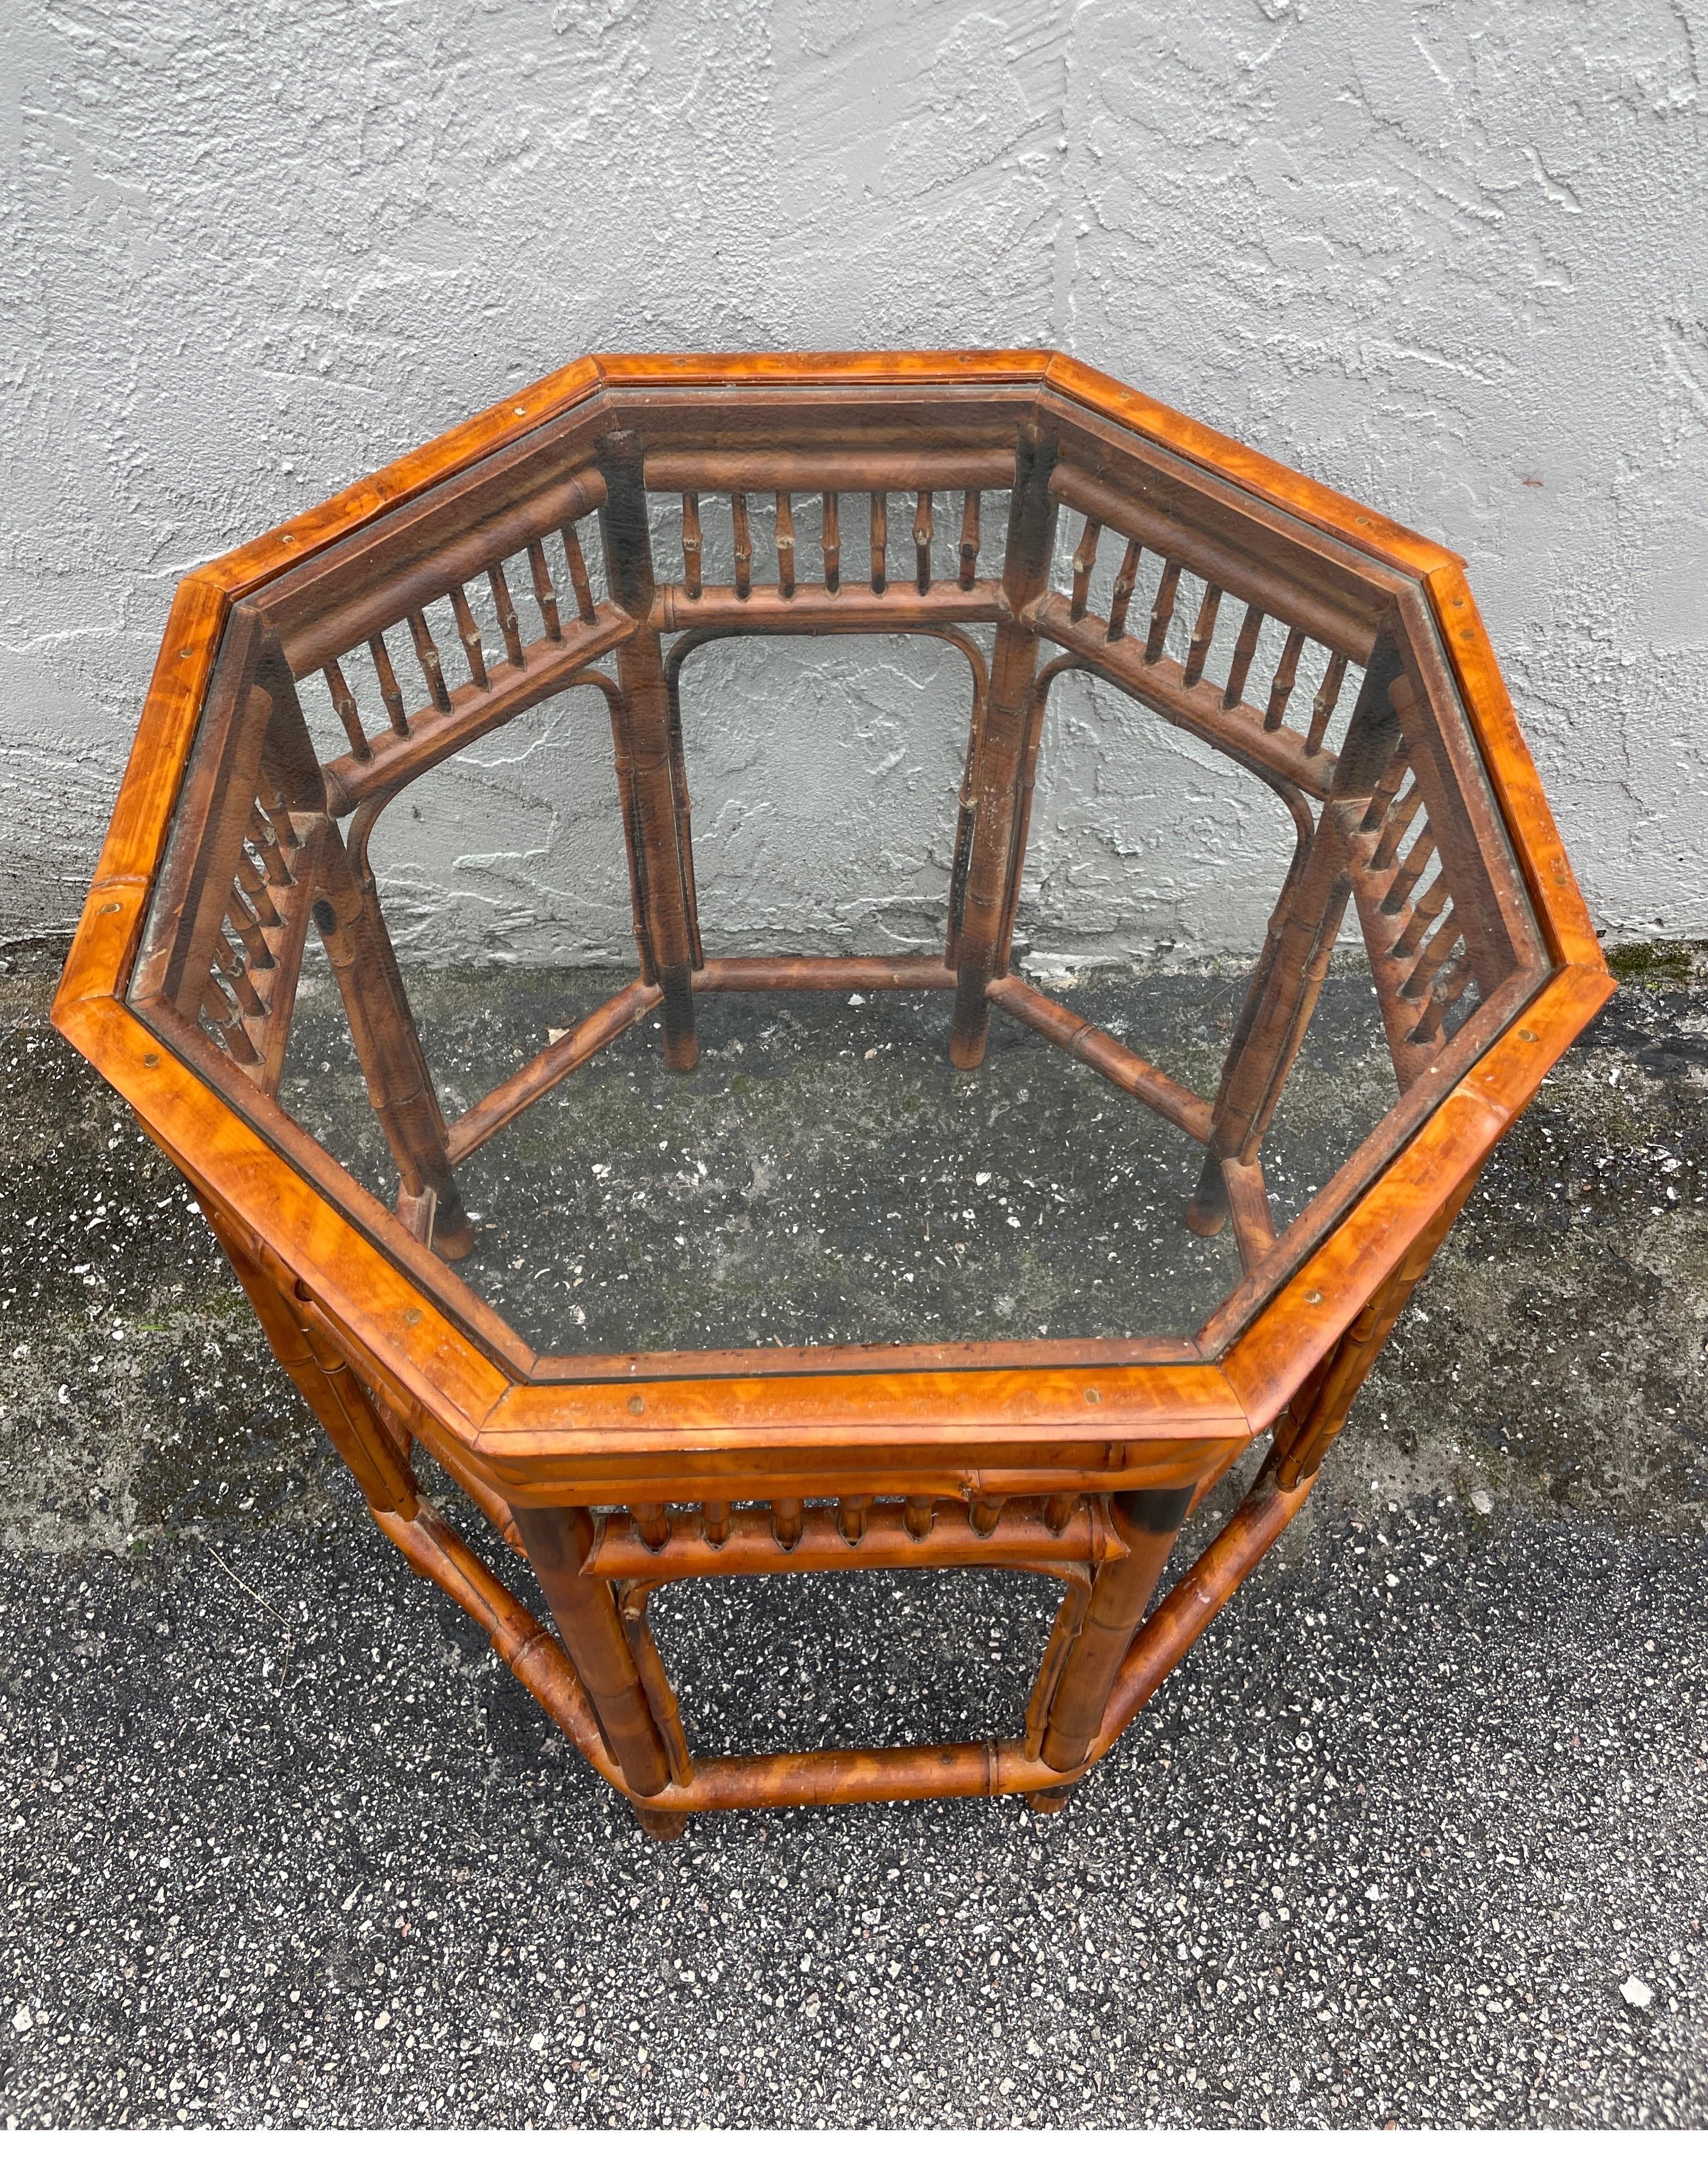 Vintage Burnt bamboo octagon shaped Brighton Pavillion side table with glass top.